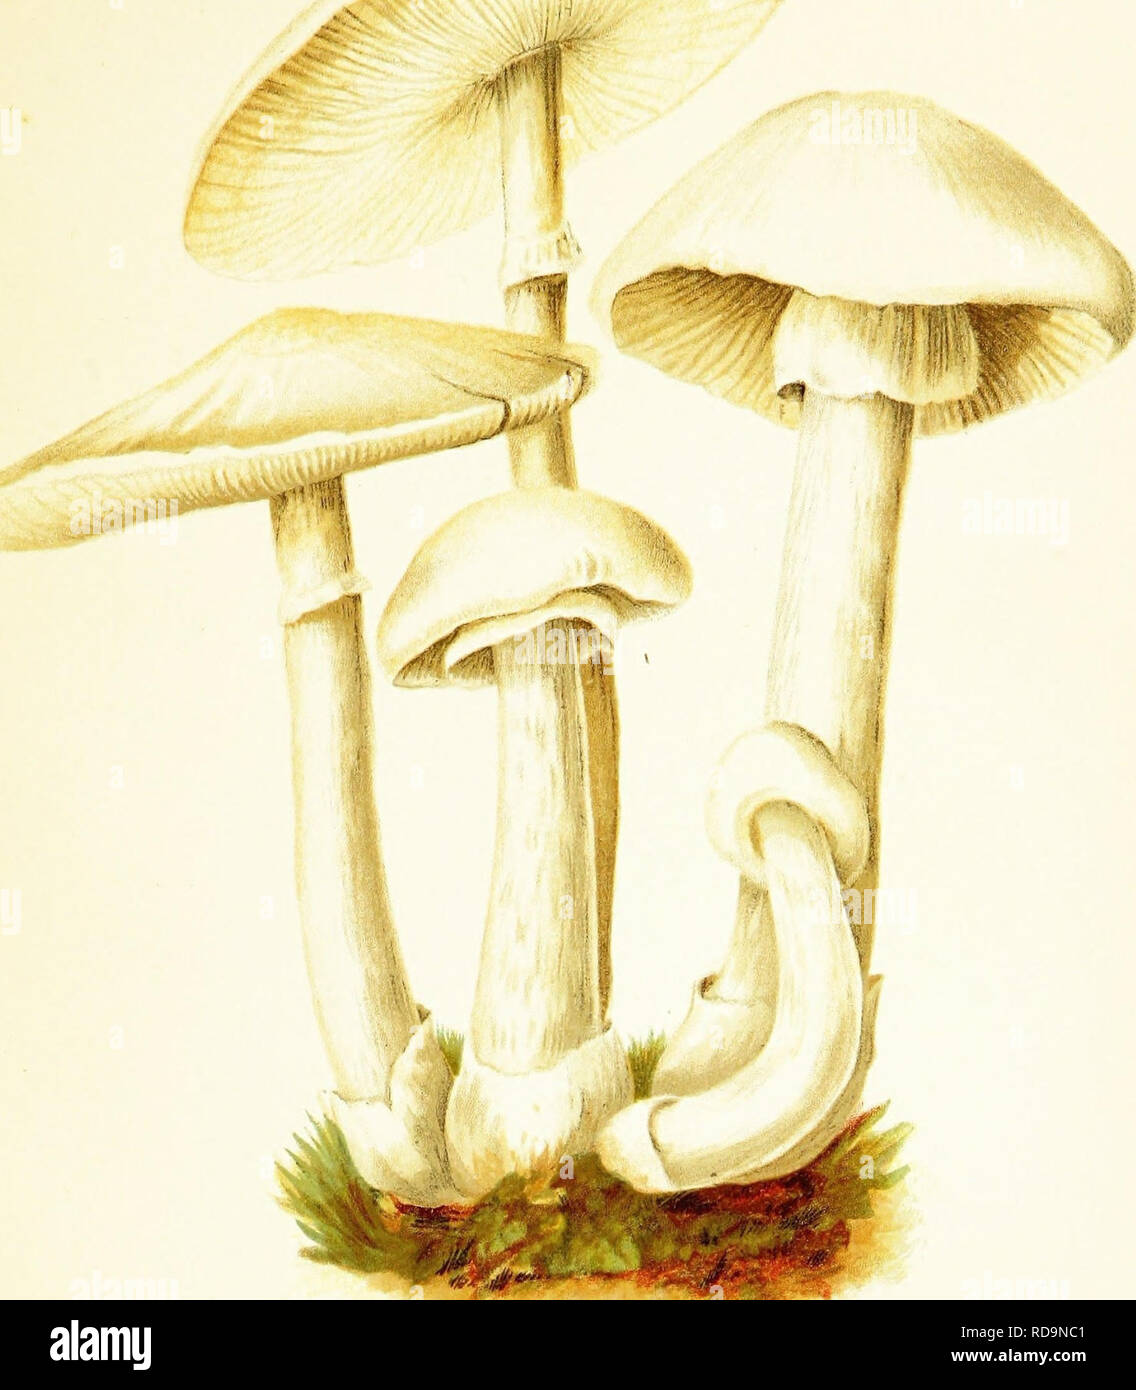 . Mushrooms of America, edible and poisonous. Mushrooms; Cookery (Mushrooms); cbk. PLATE IX. .AGAKlUUii (AMANITA} VERNUS, OR POISONOUS WHITE MUSHROOM.. DESCRIPTION. PiiEus. At first ovate or bulbous, enclosed In the volva, then expanded, alw.ays pure white usually clammy or riscid to the touch; cuticle thin, separable. ' Gills. Pure white, unequal, free from the stem. Stem. Long, rough or woolly, stuffed or a little hollow toward the cap. Volva. Always present. Ring marked at medium growth; often absent at maturity of the plant; and the same is true of the warts or scurf on the cap. N. B. This Stock Photo